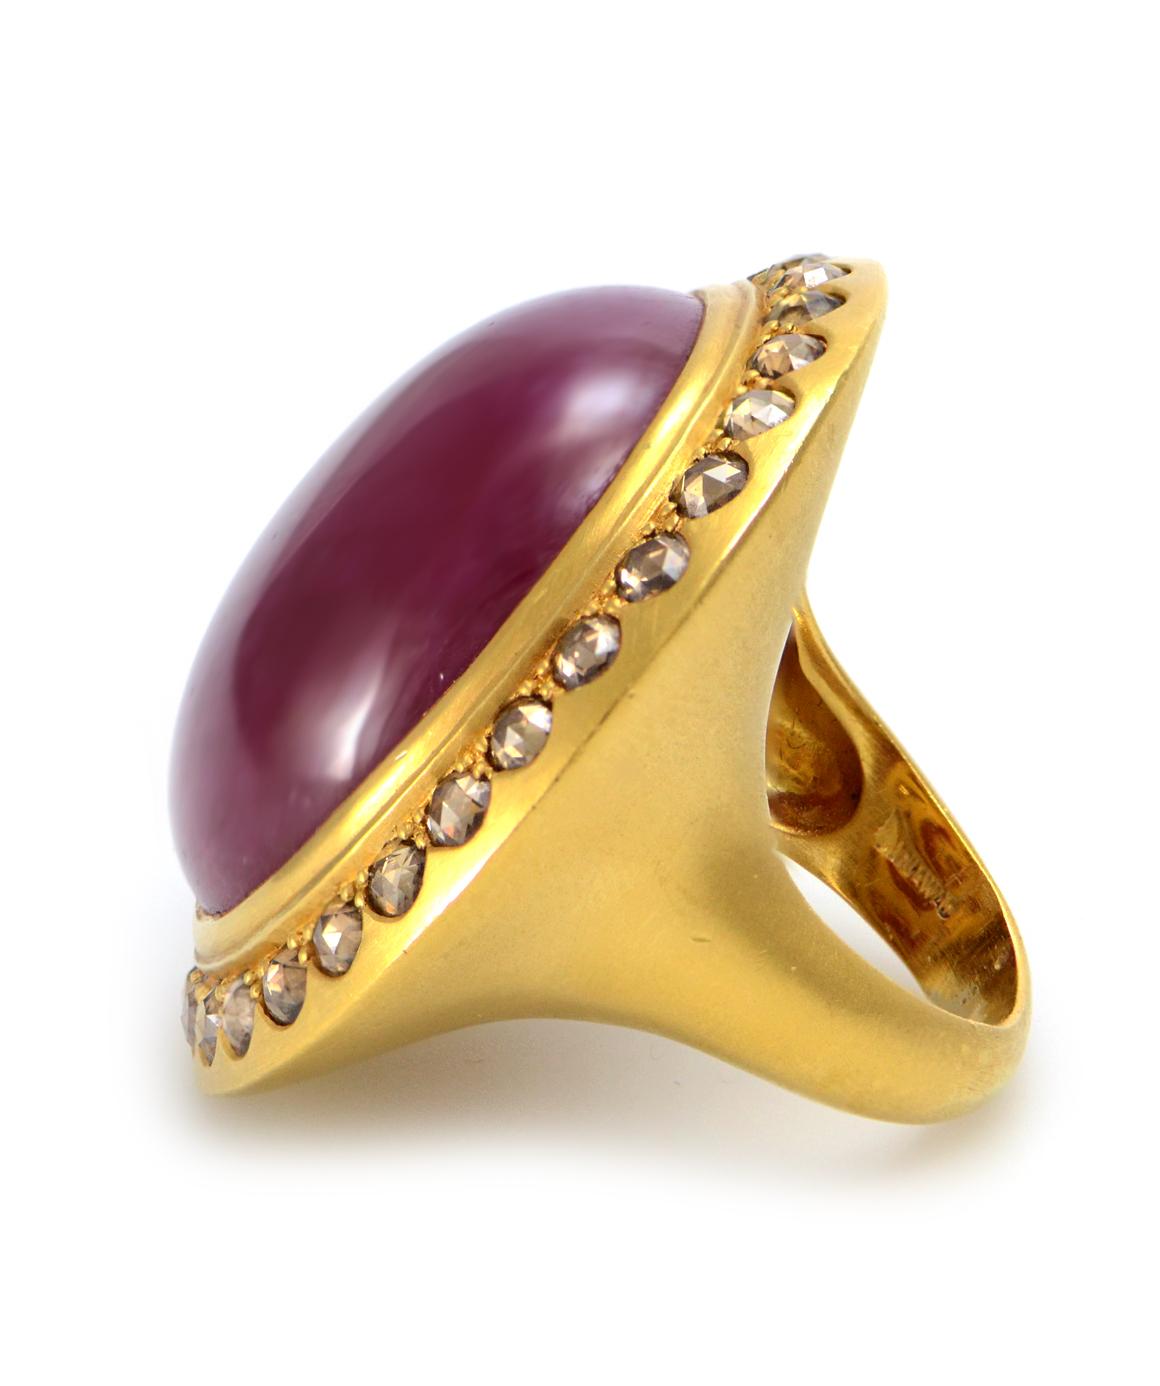 100% Auth Mouawad 22K Yellow Gold Genuine Cabochon Ruby & Natural Diamond Ring 1